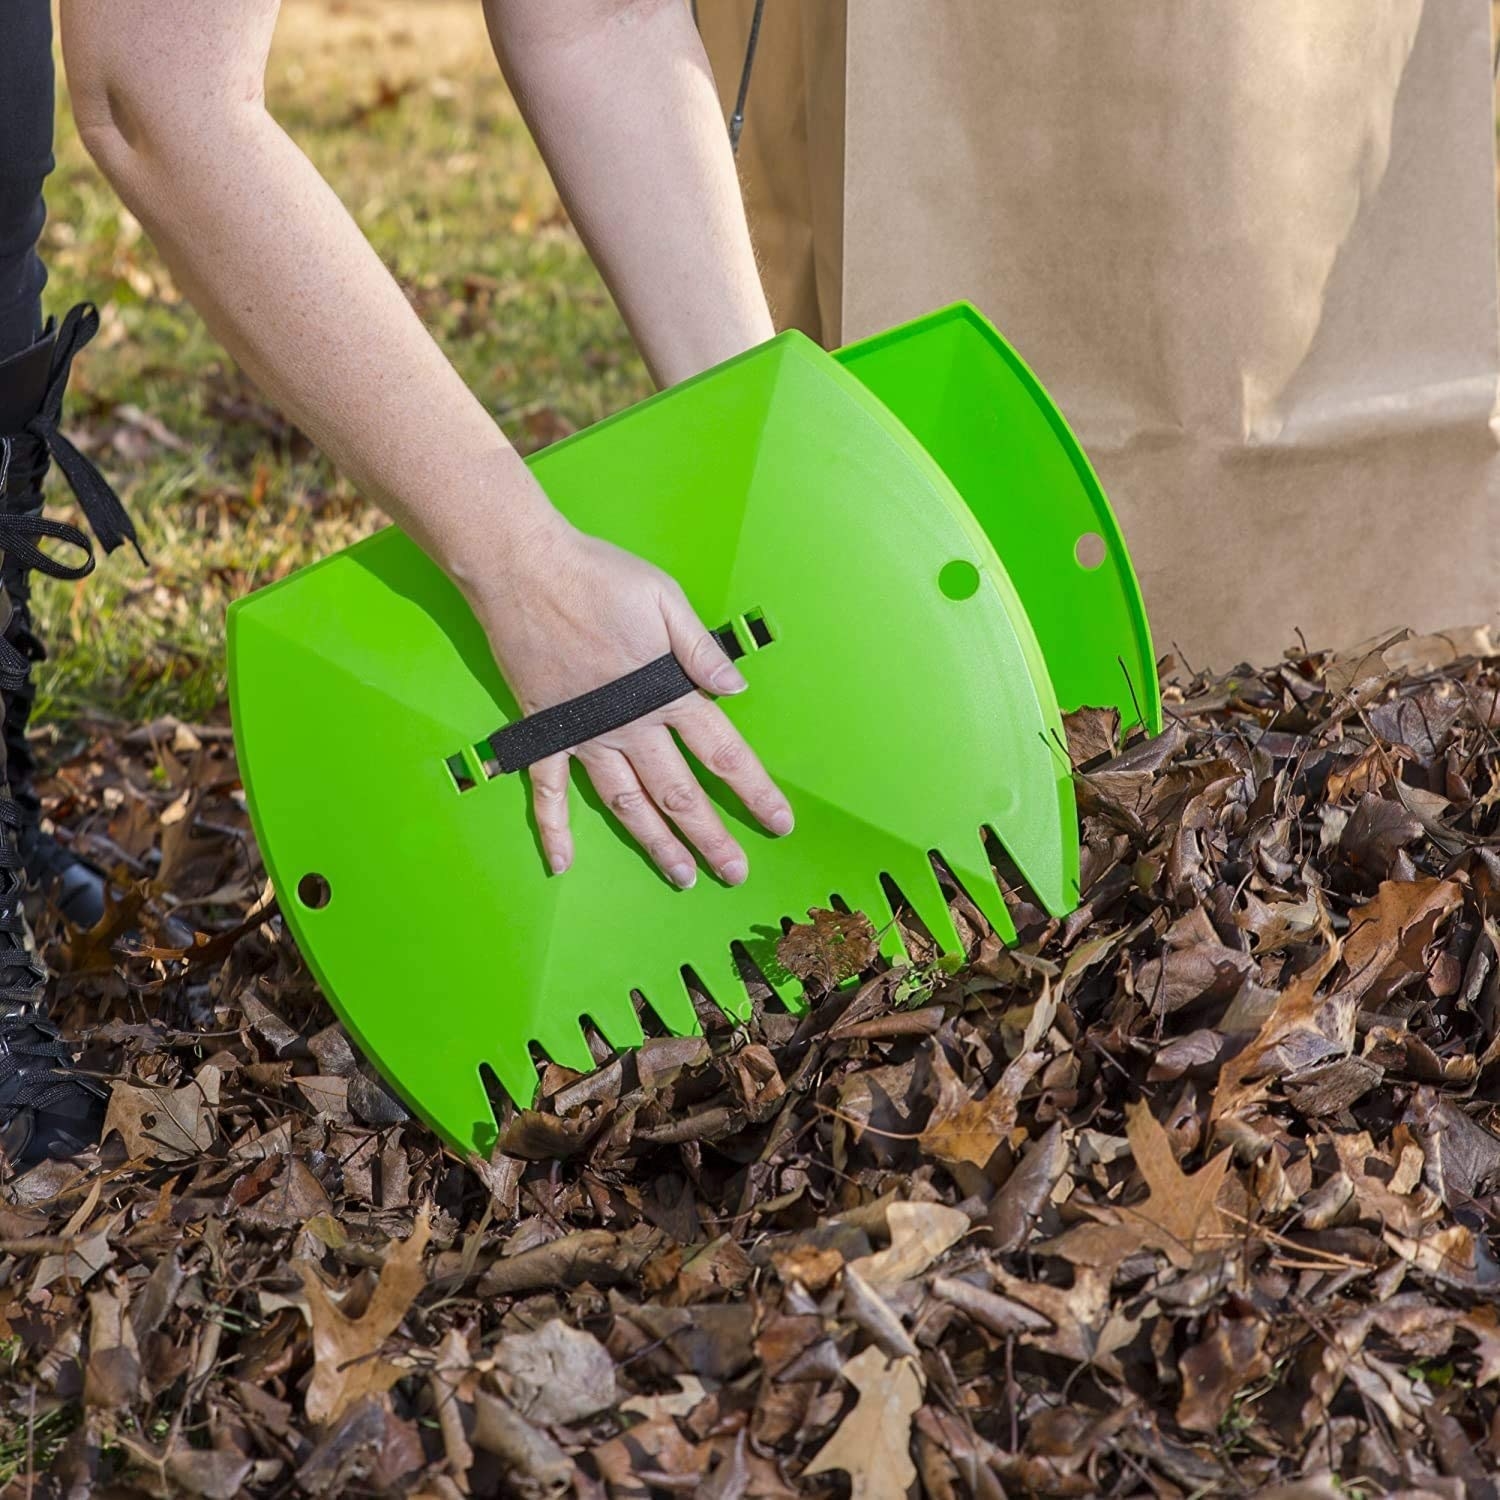 A person picking up a pile of leaves with huge claw-like leaf scoops on their hands